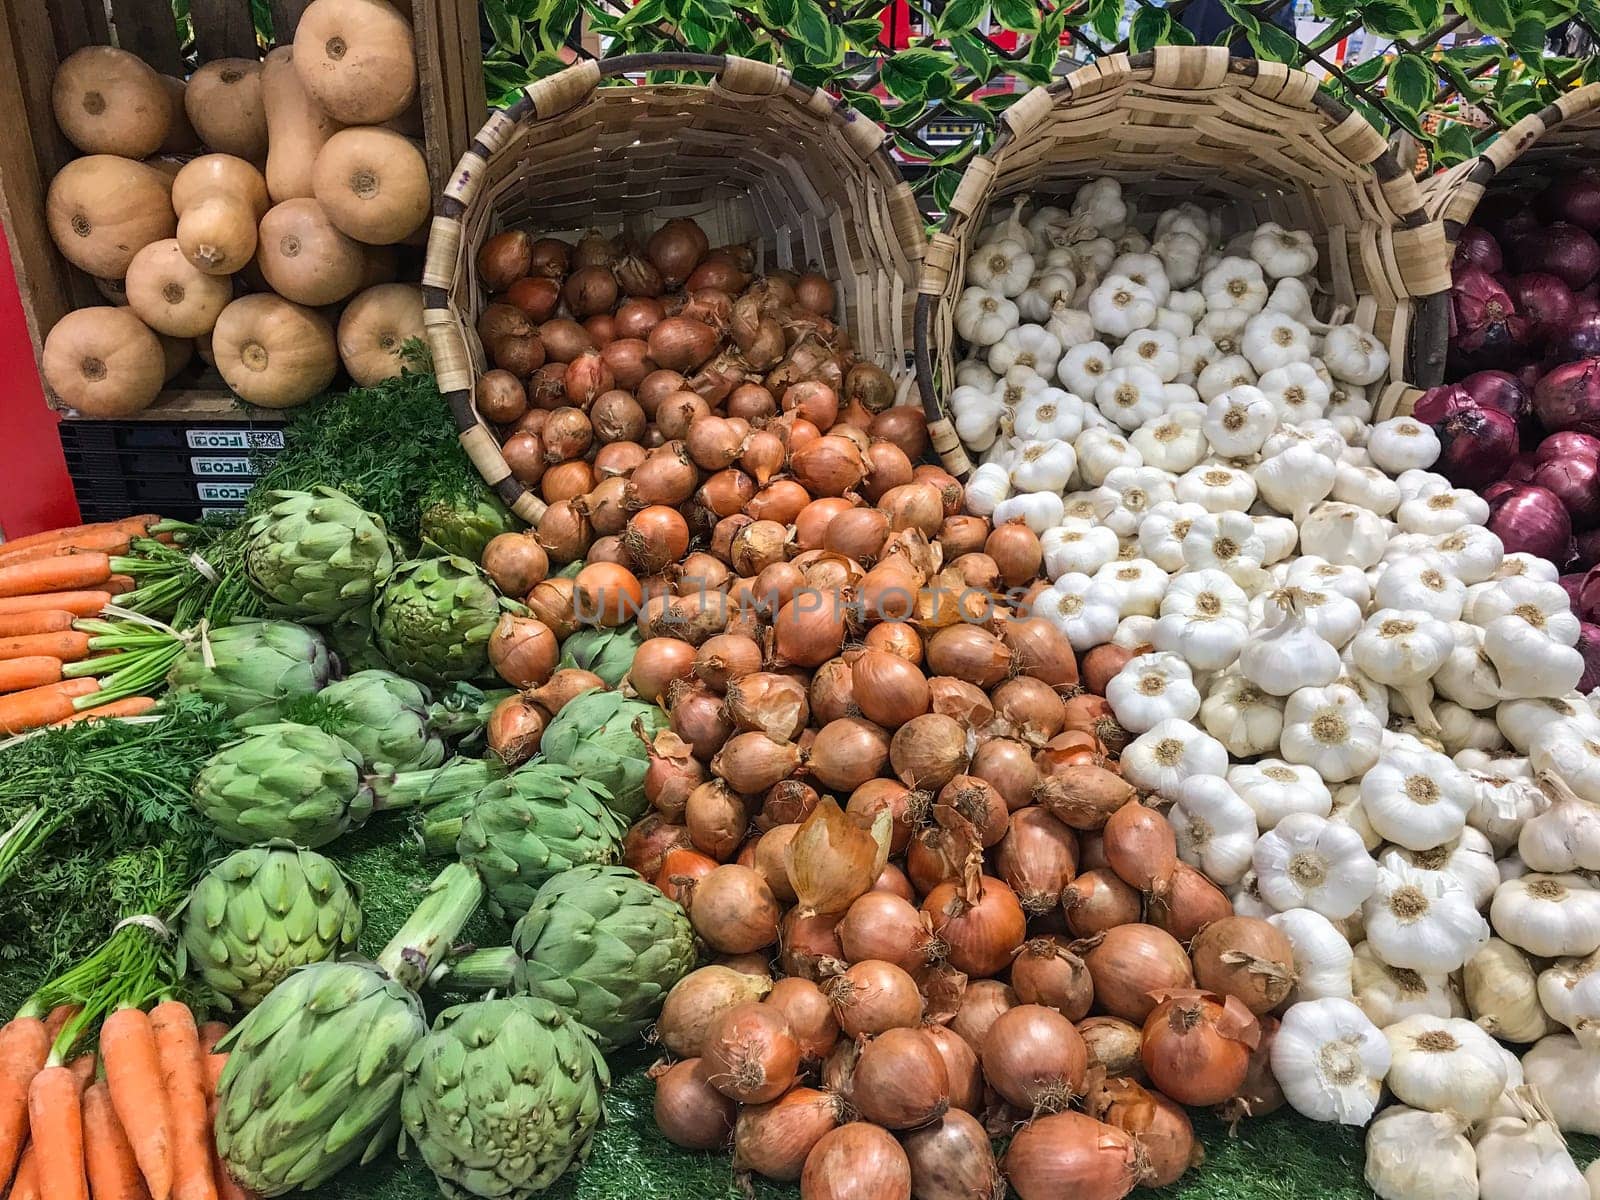 Garlic, white onions, red onions and artichokes sold in wicker baskets in supermarkets, High quality photo